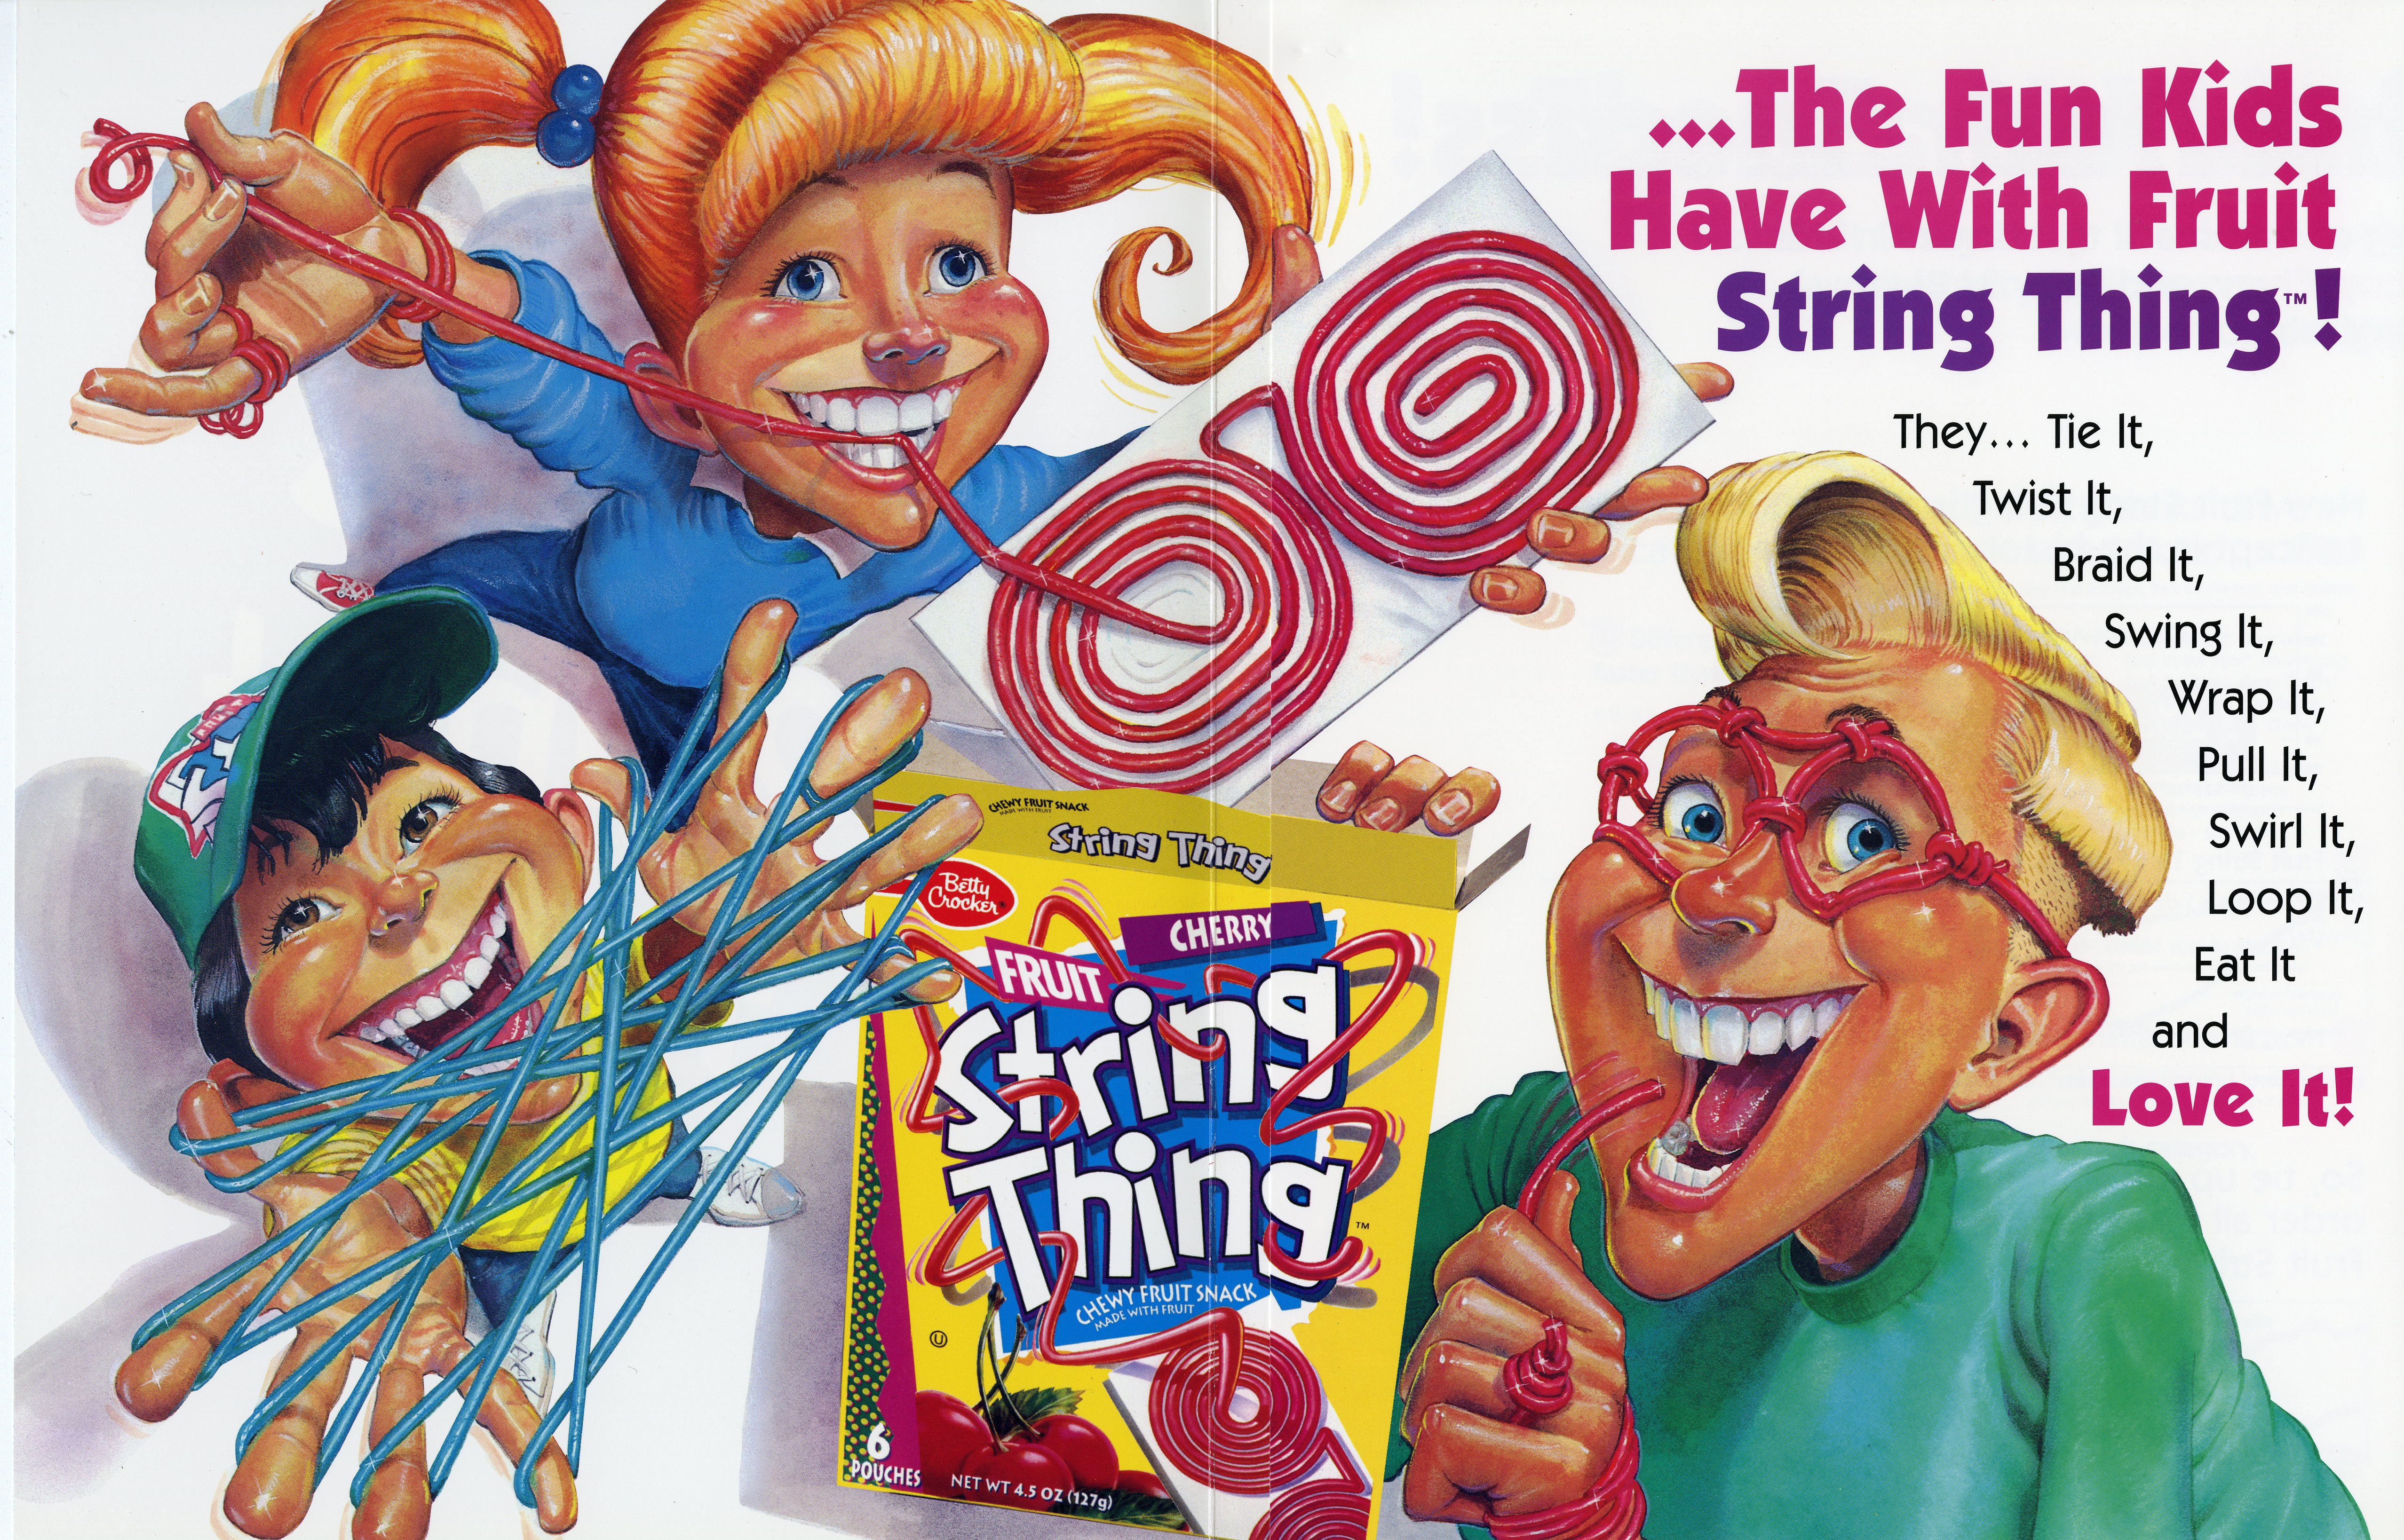 Advertisement for String Thing fruit snacks